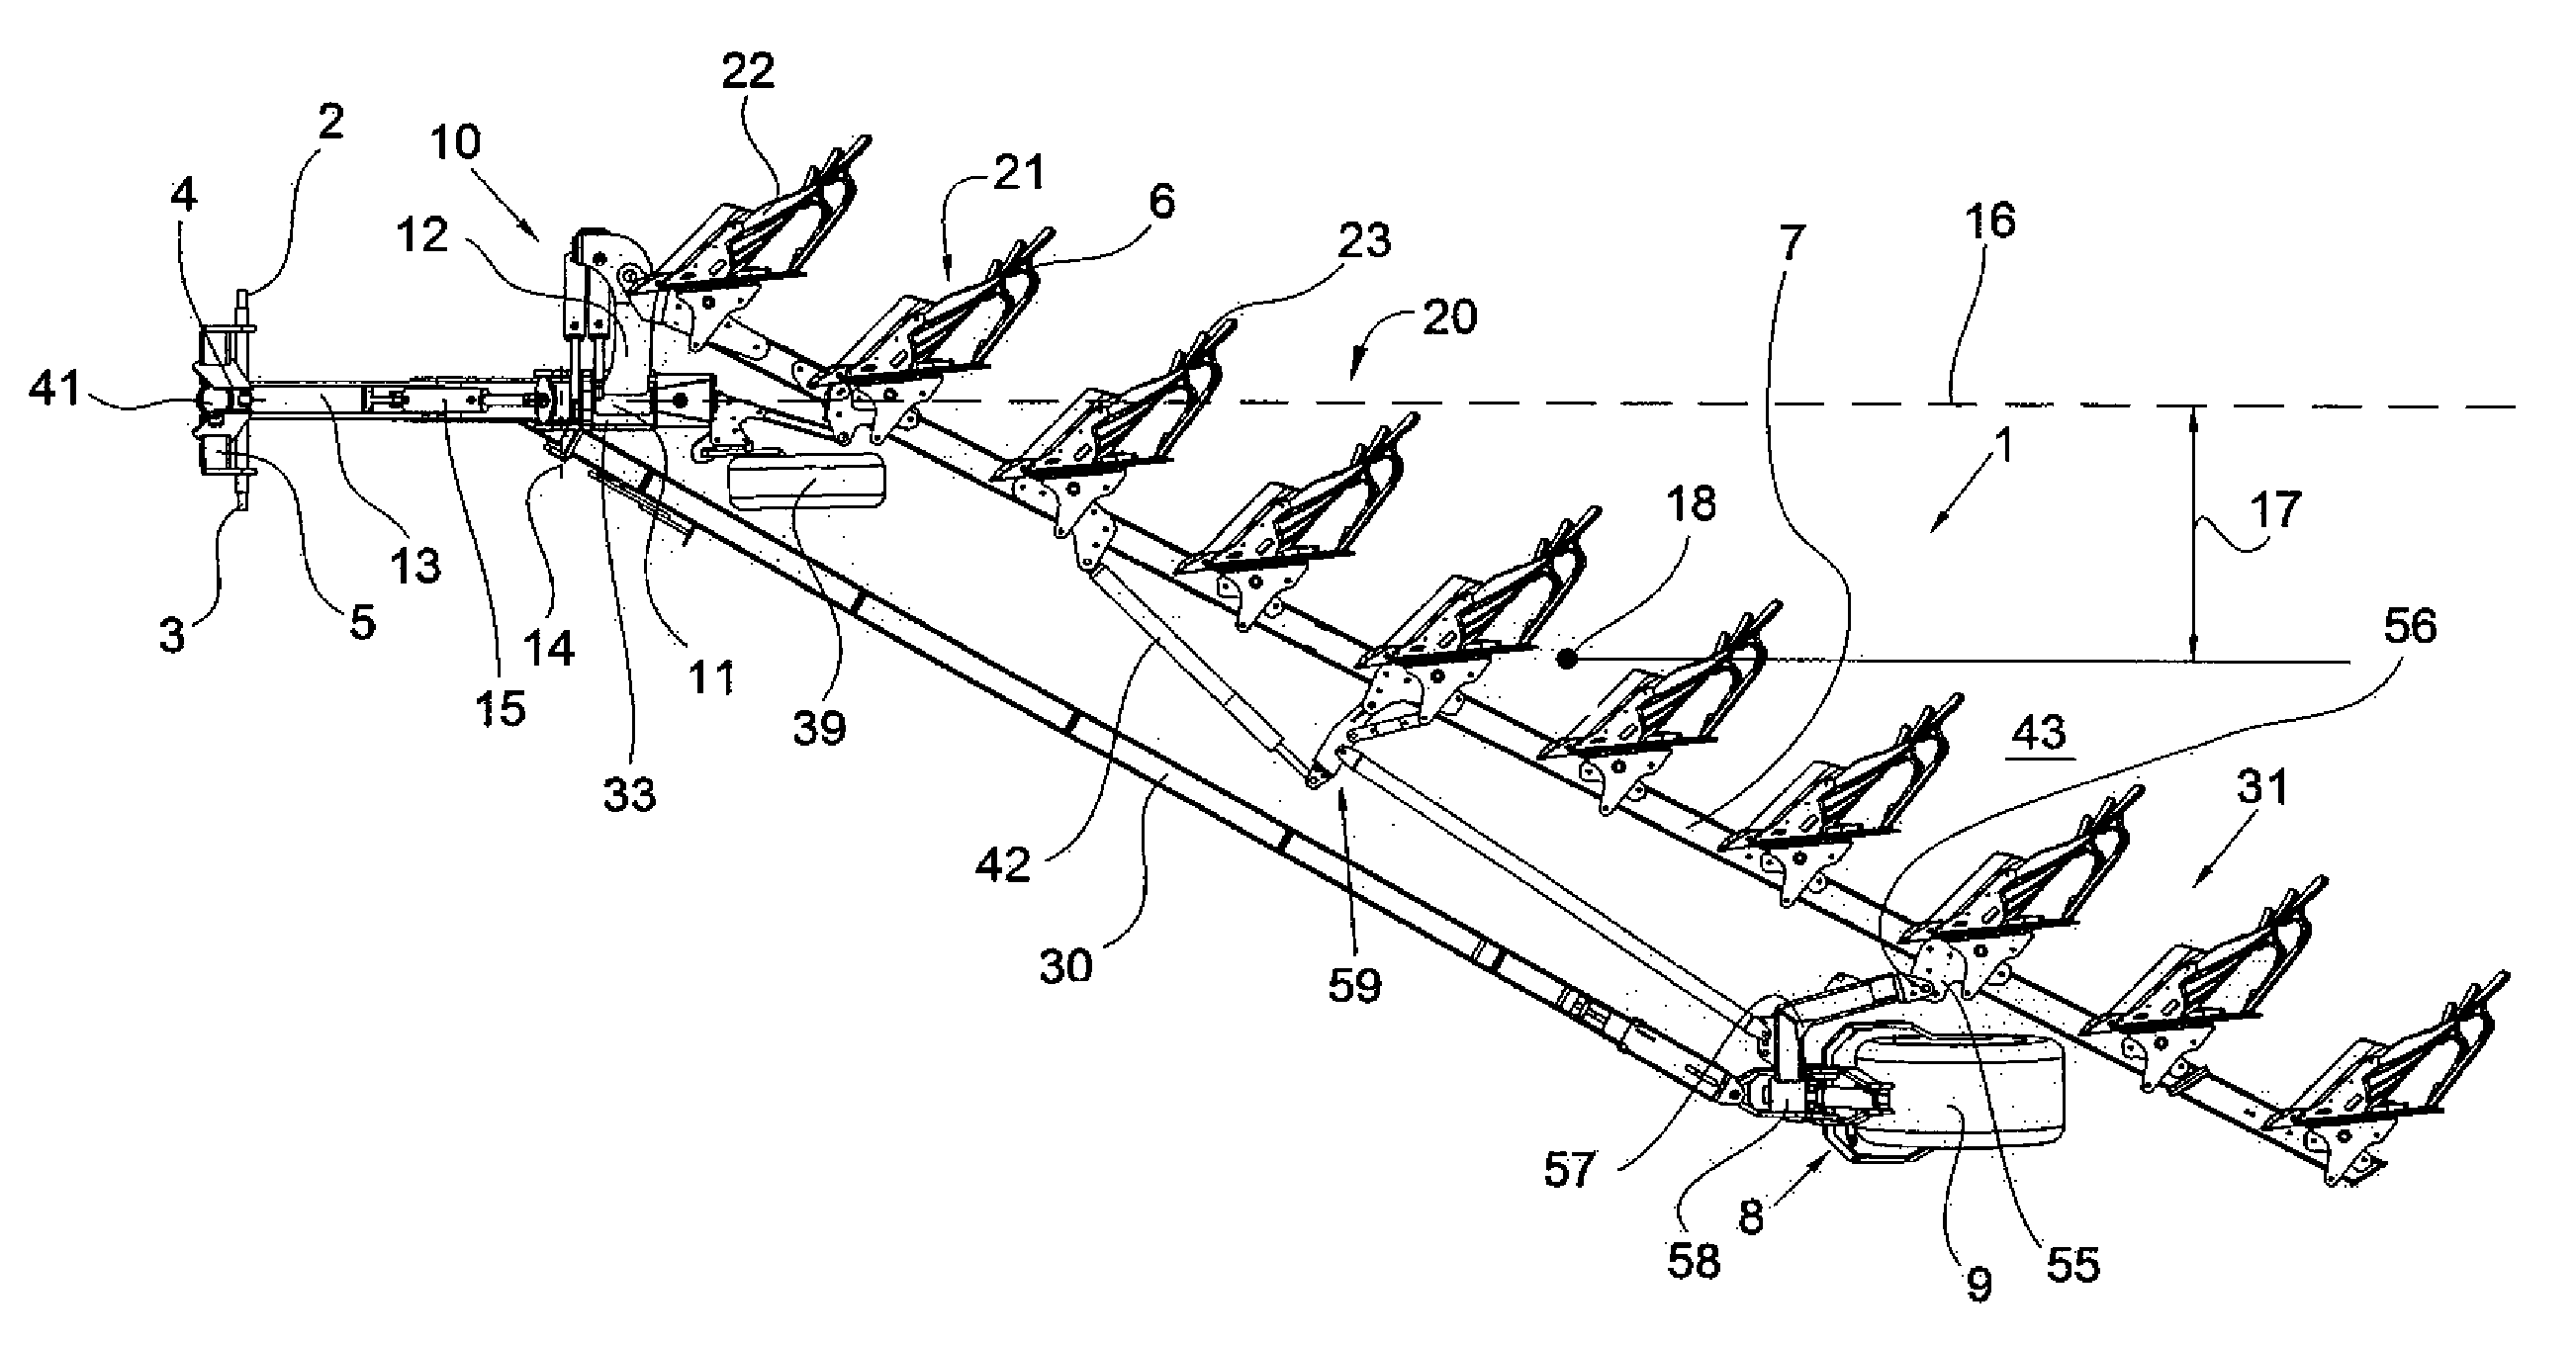 Semi-mounted reversible plow with rotary amplifier